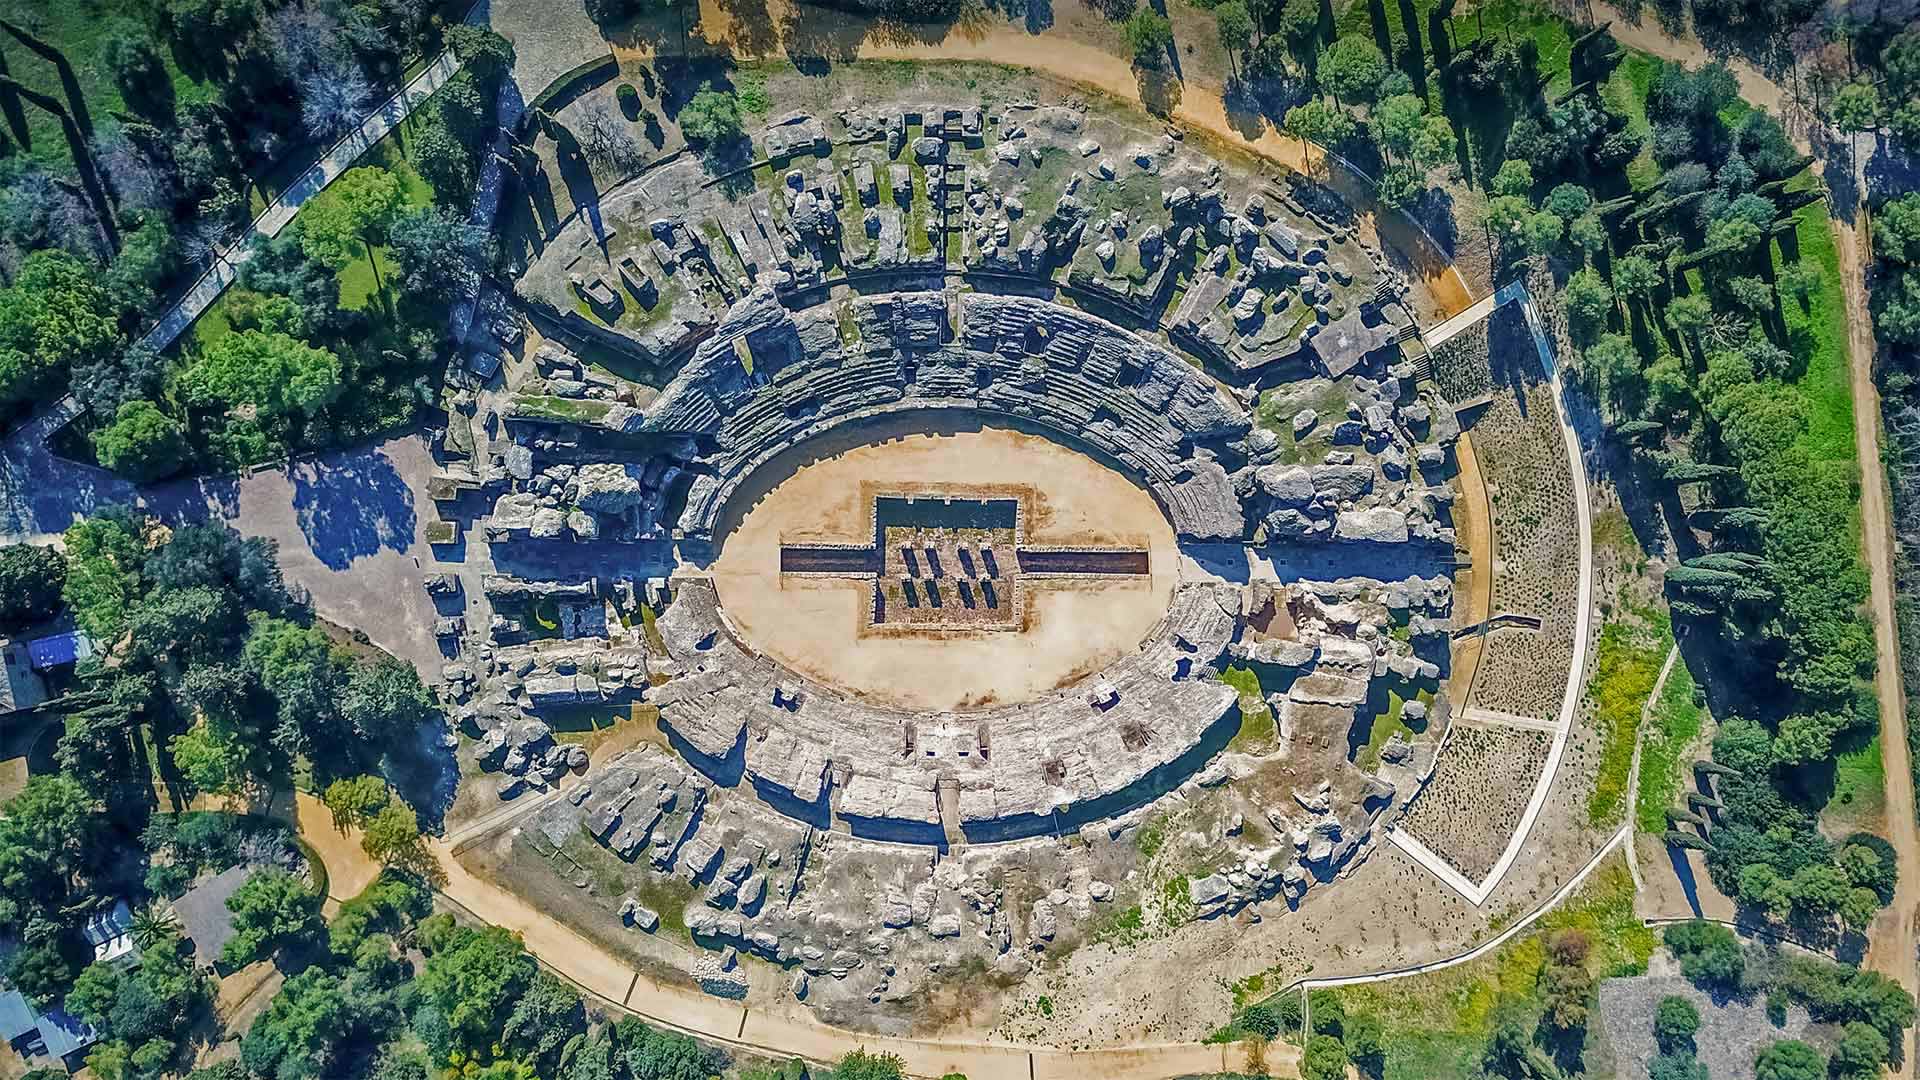 The Roman amphitheater of Itálica, near Seville, Spain - Amazing Aerial Agency/Offset by Shutterstock)